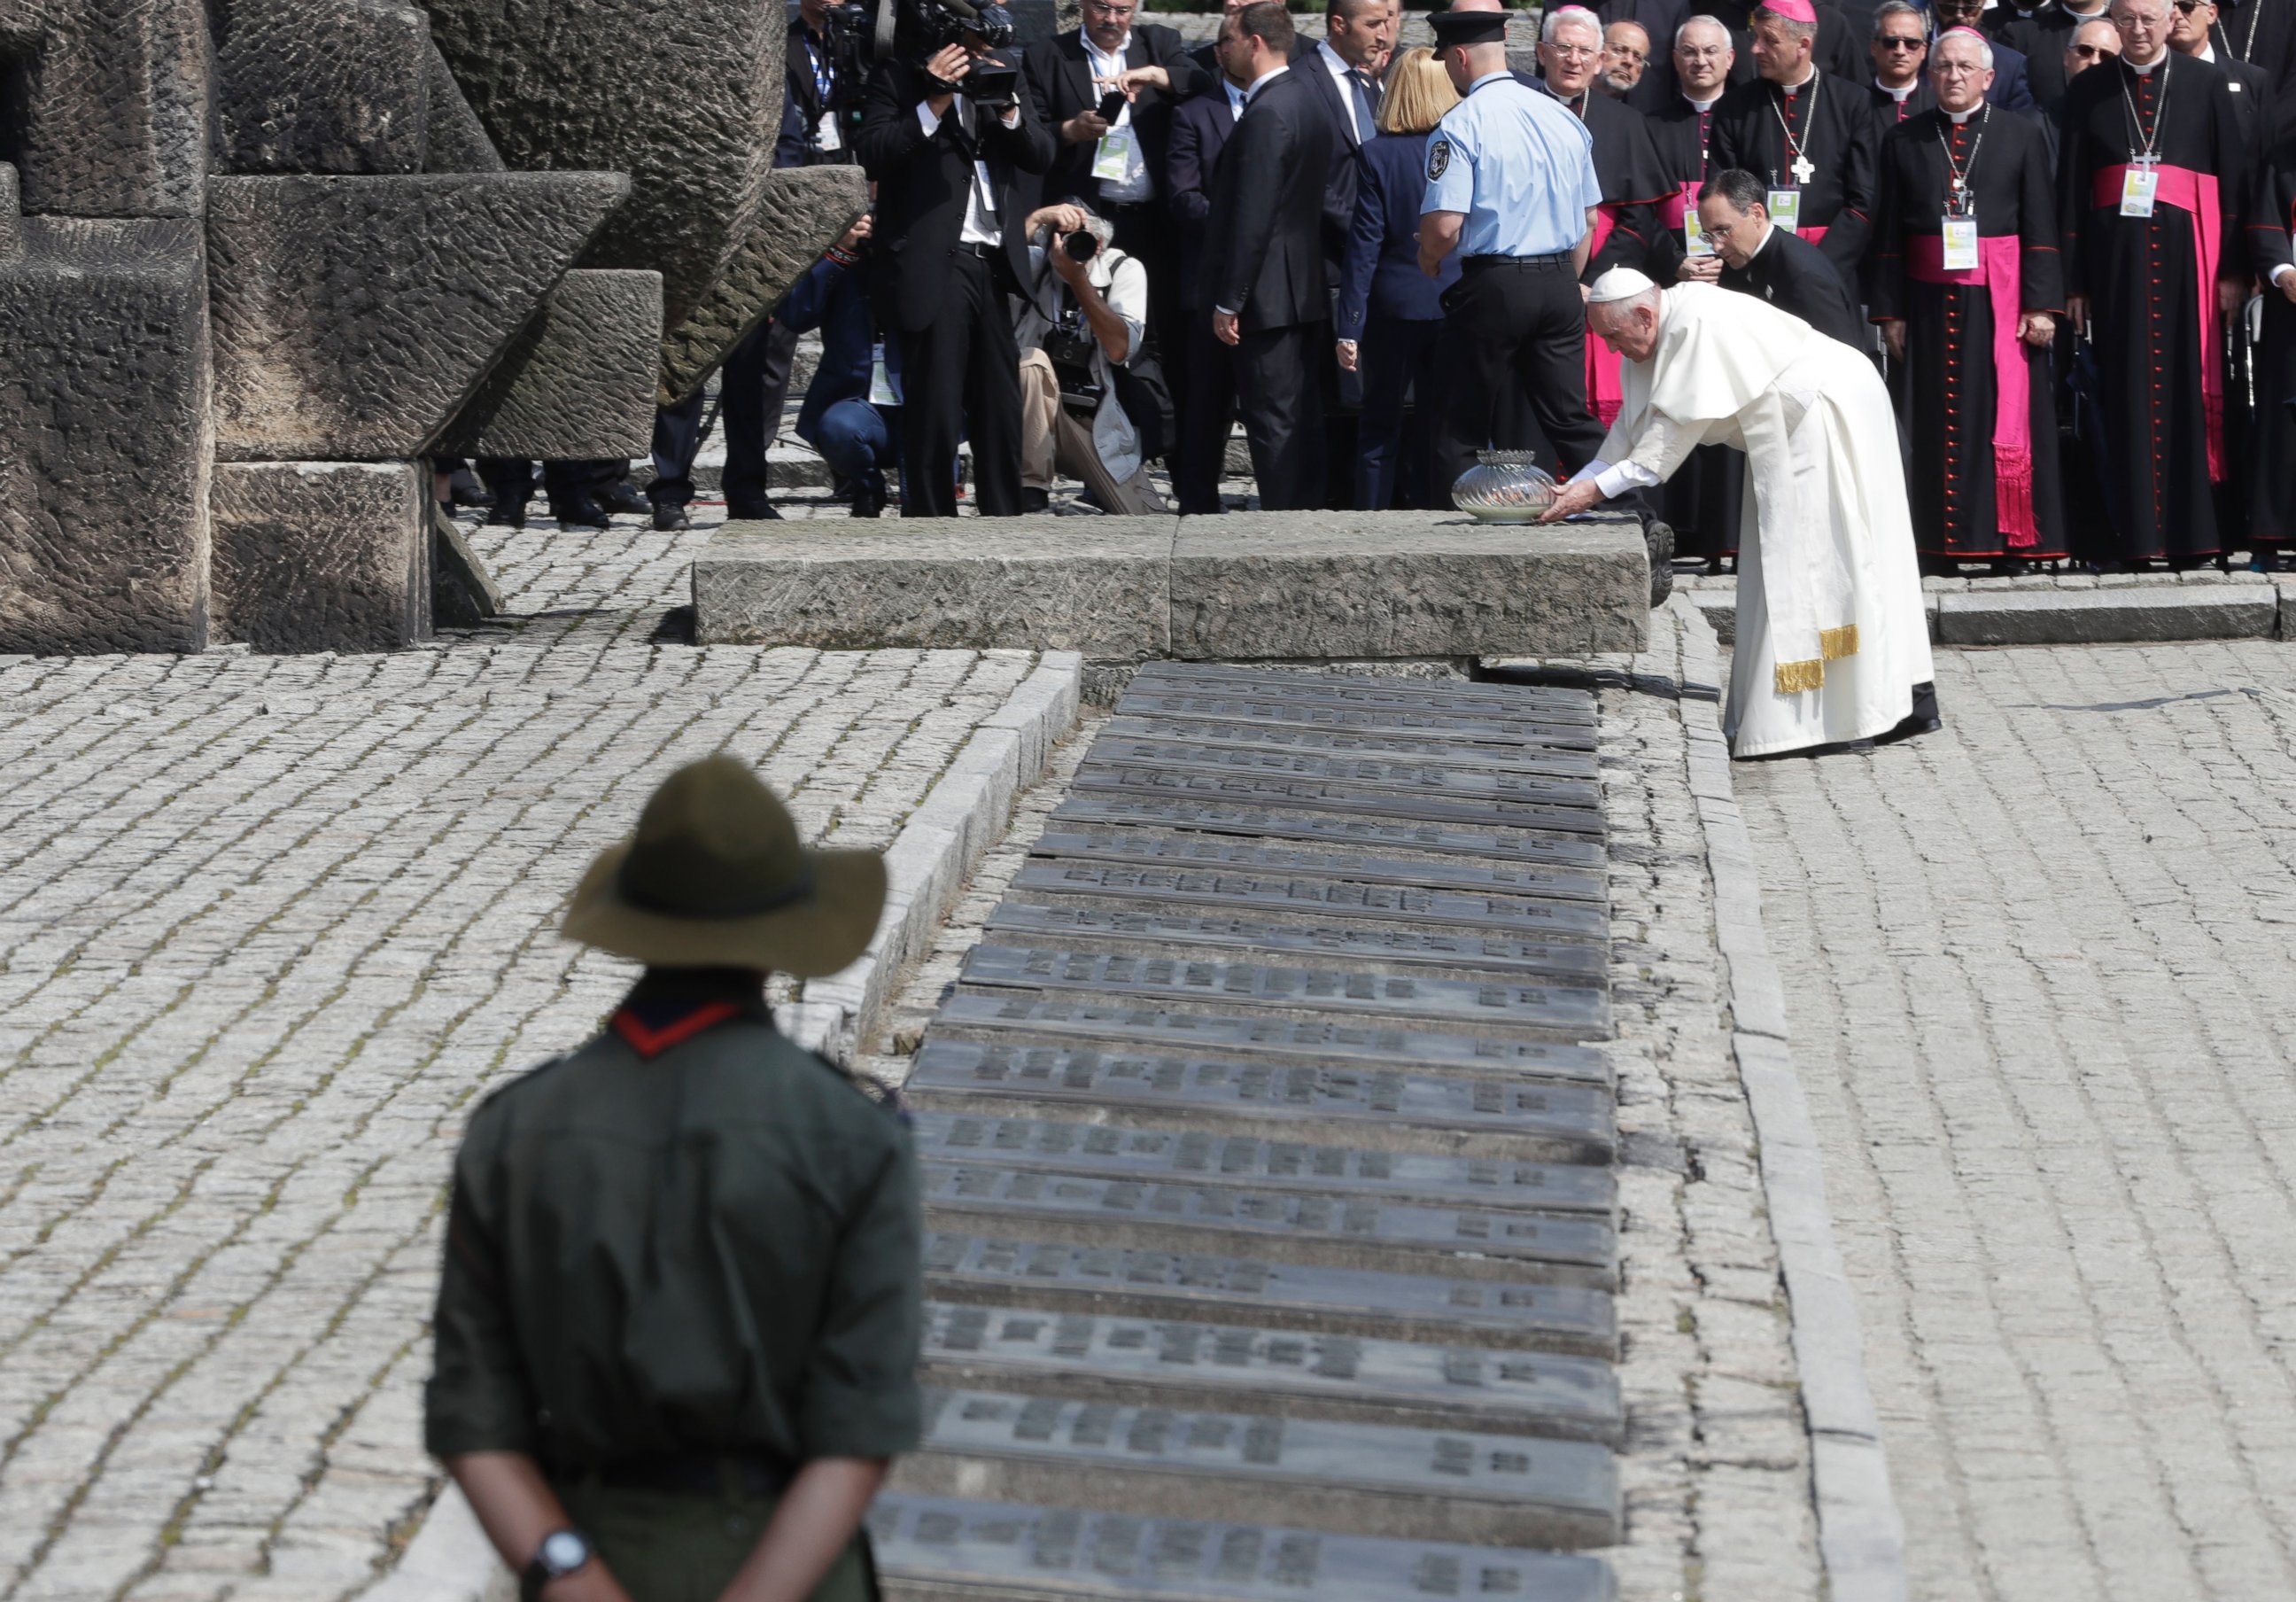 PHOTO: Pope Francis prays in front of the Memorial at the former Nazi Death Camp Auschwitz-Birkenau, in Oswiecim, Poland, July 29, 2016.  